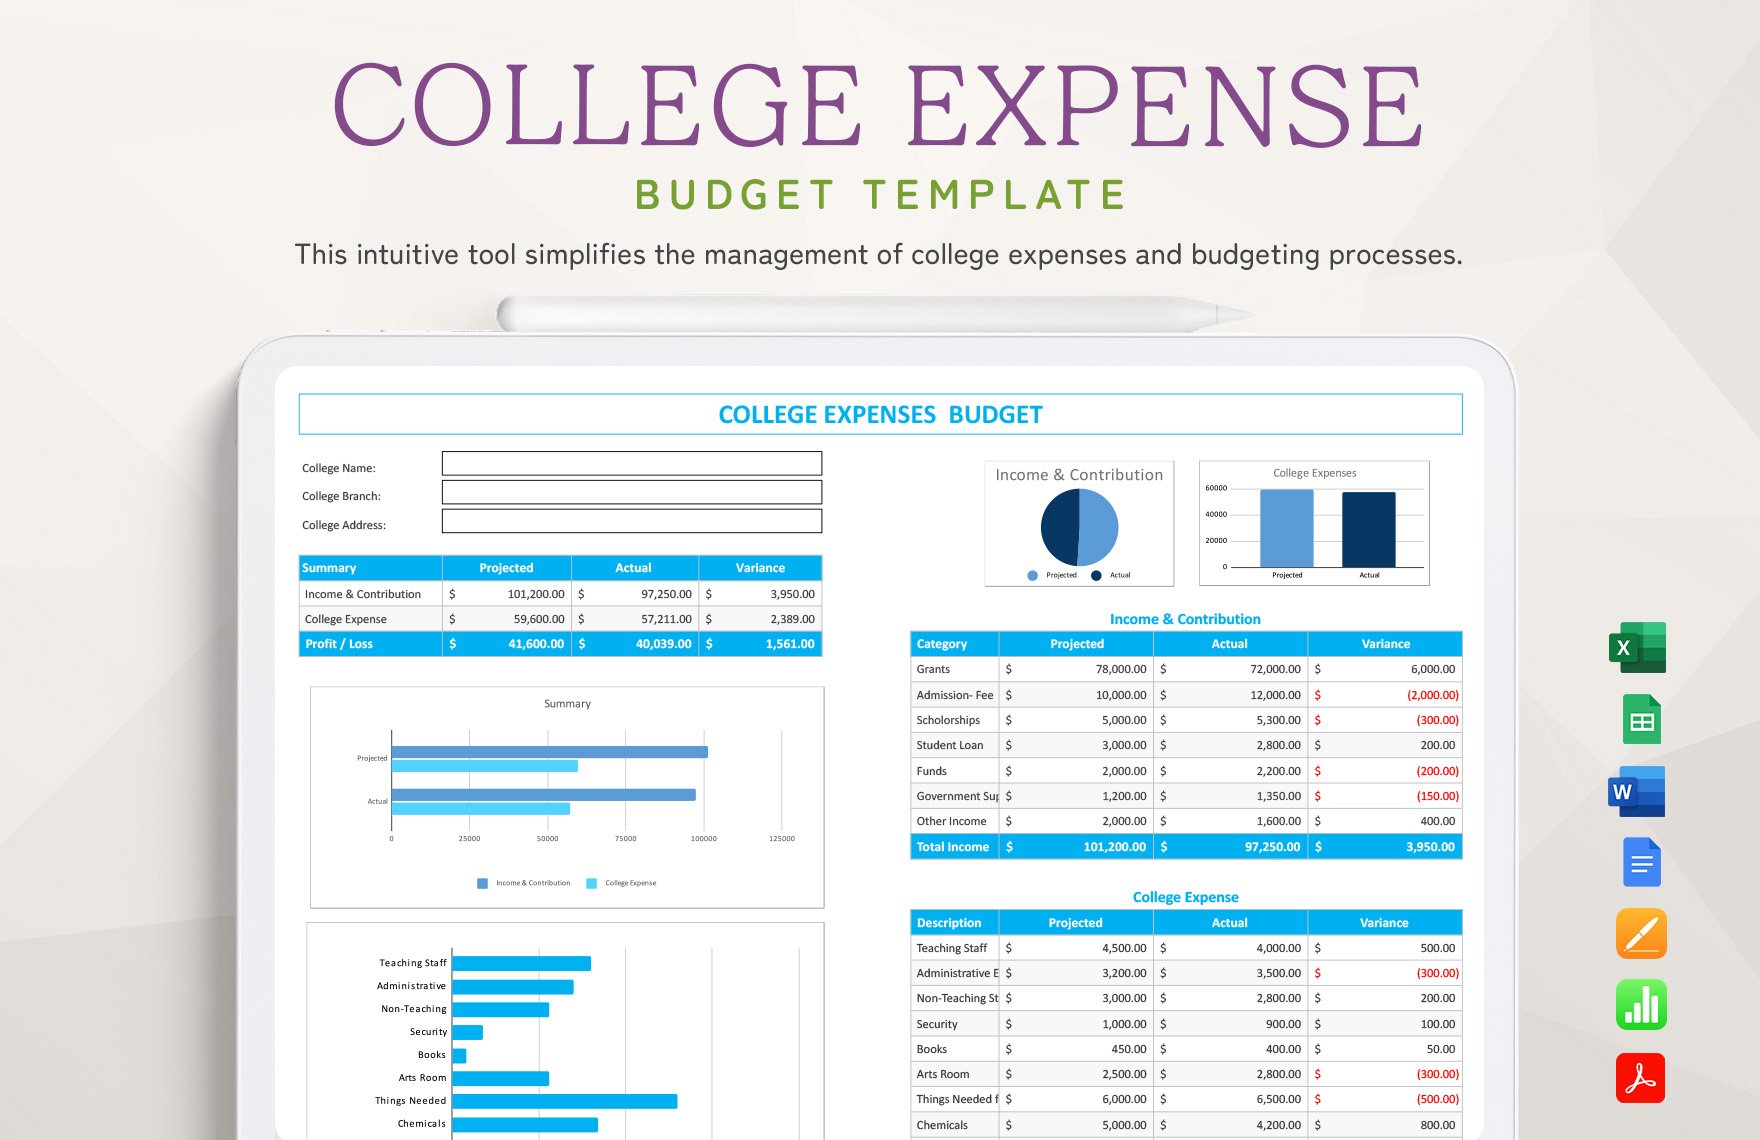 College Expense Budget Template in Word, Google Docs, Excel, PDF, Google Sheets, Apple Pages, Apple Numbers